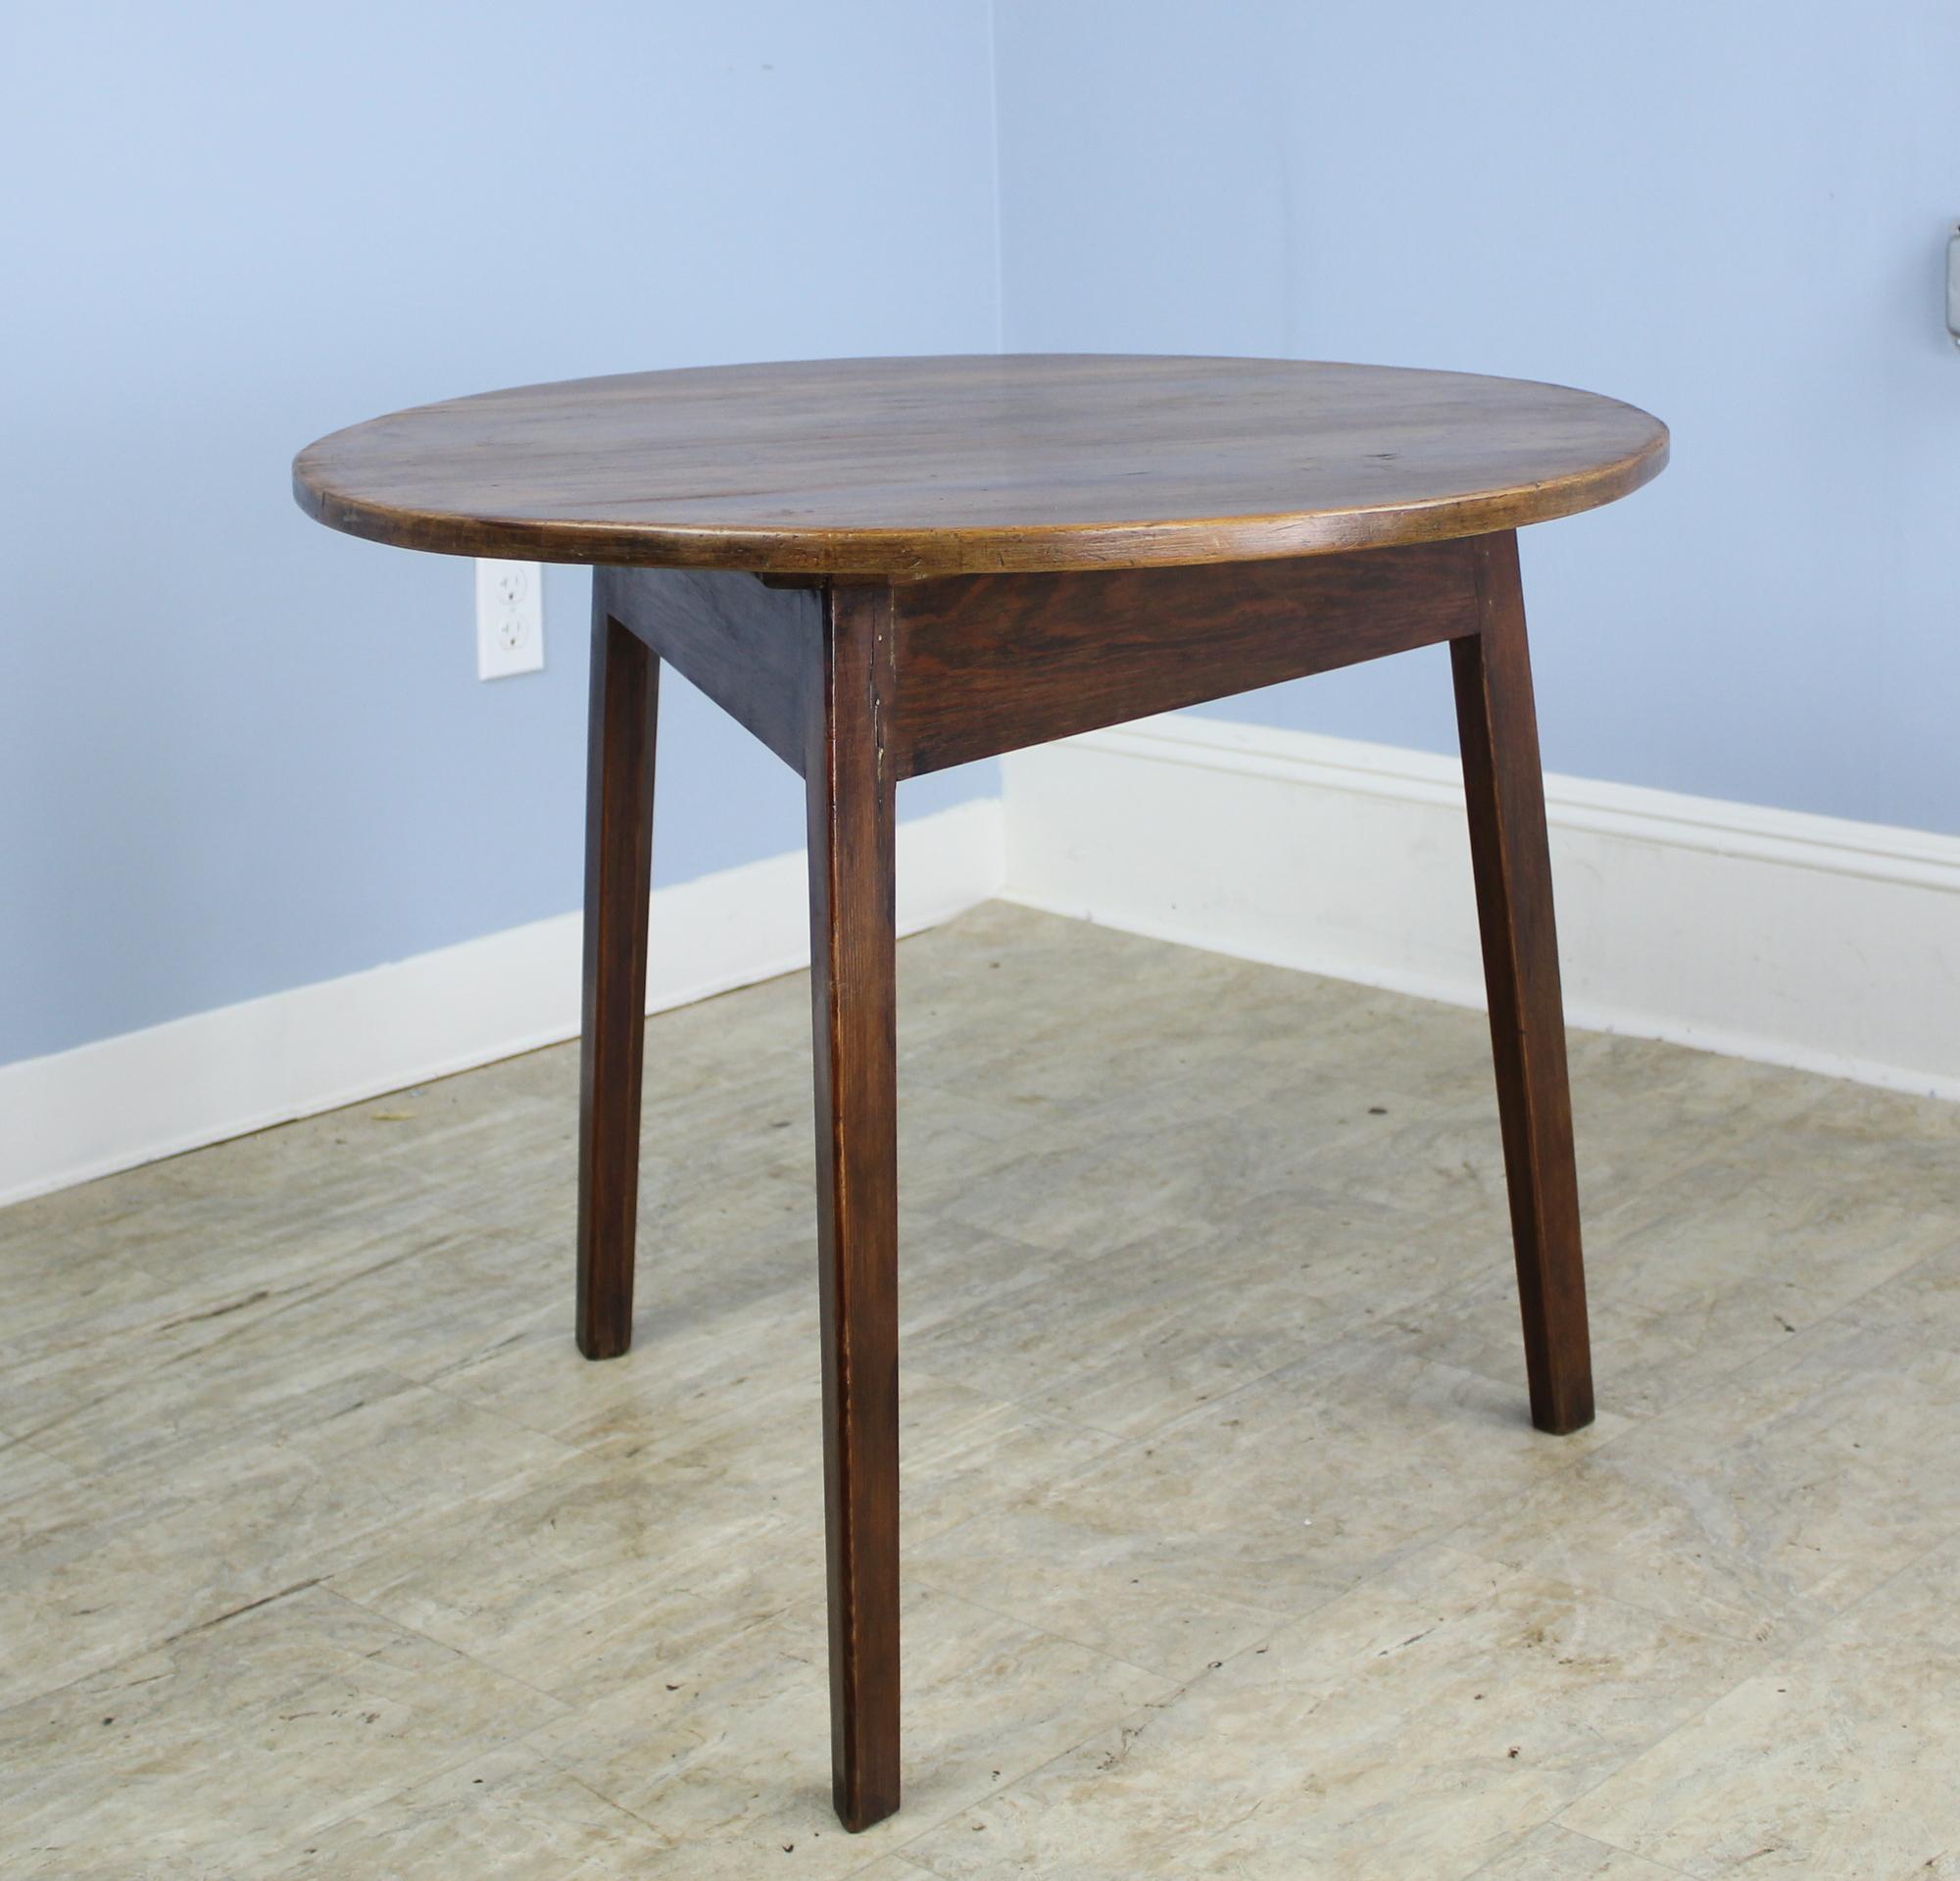 A pretty cricket table with suitable height for use as a good side, lamp or occasional table. The fruitwood top has rich color and god patina. Traditional tripod base construction. A simple versatile Silhouette.